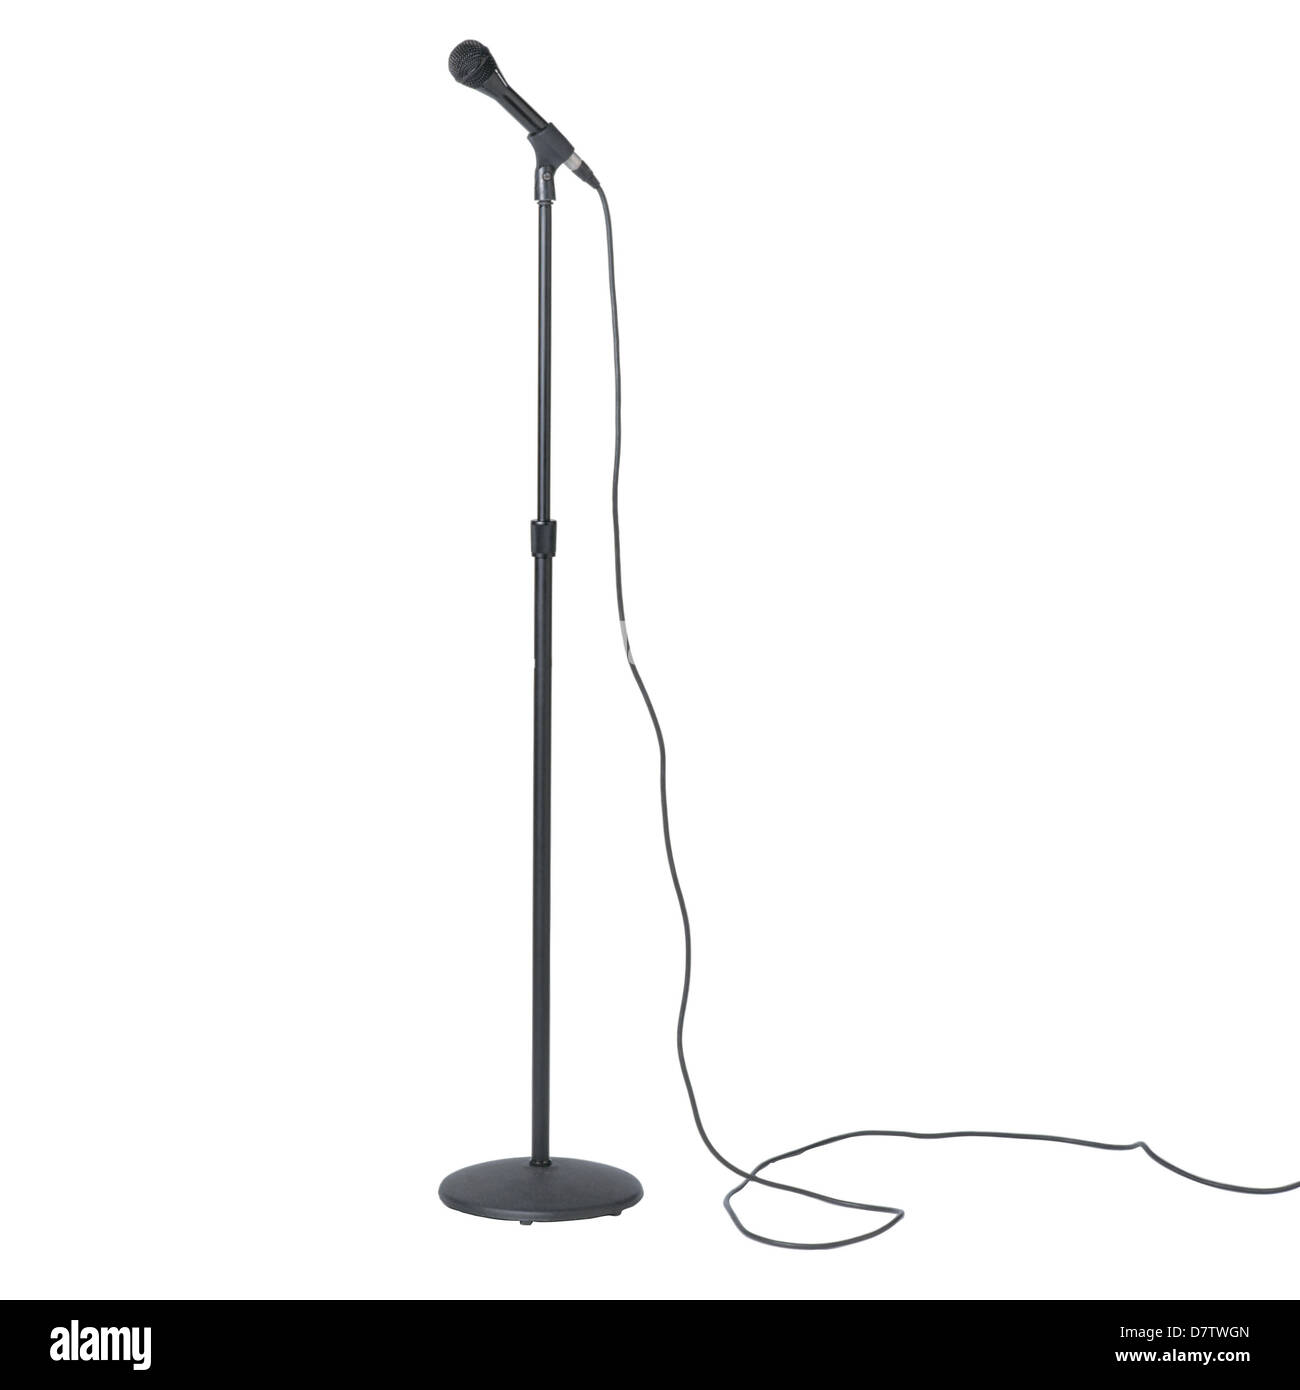 A microphone and stand on a white background Stock Photo